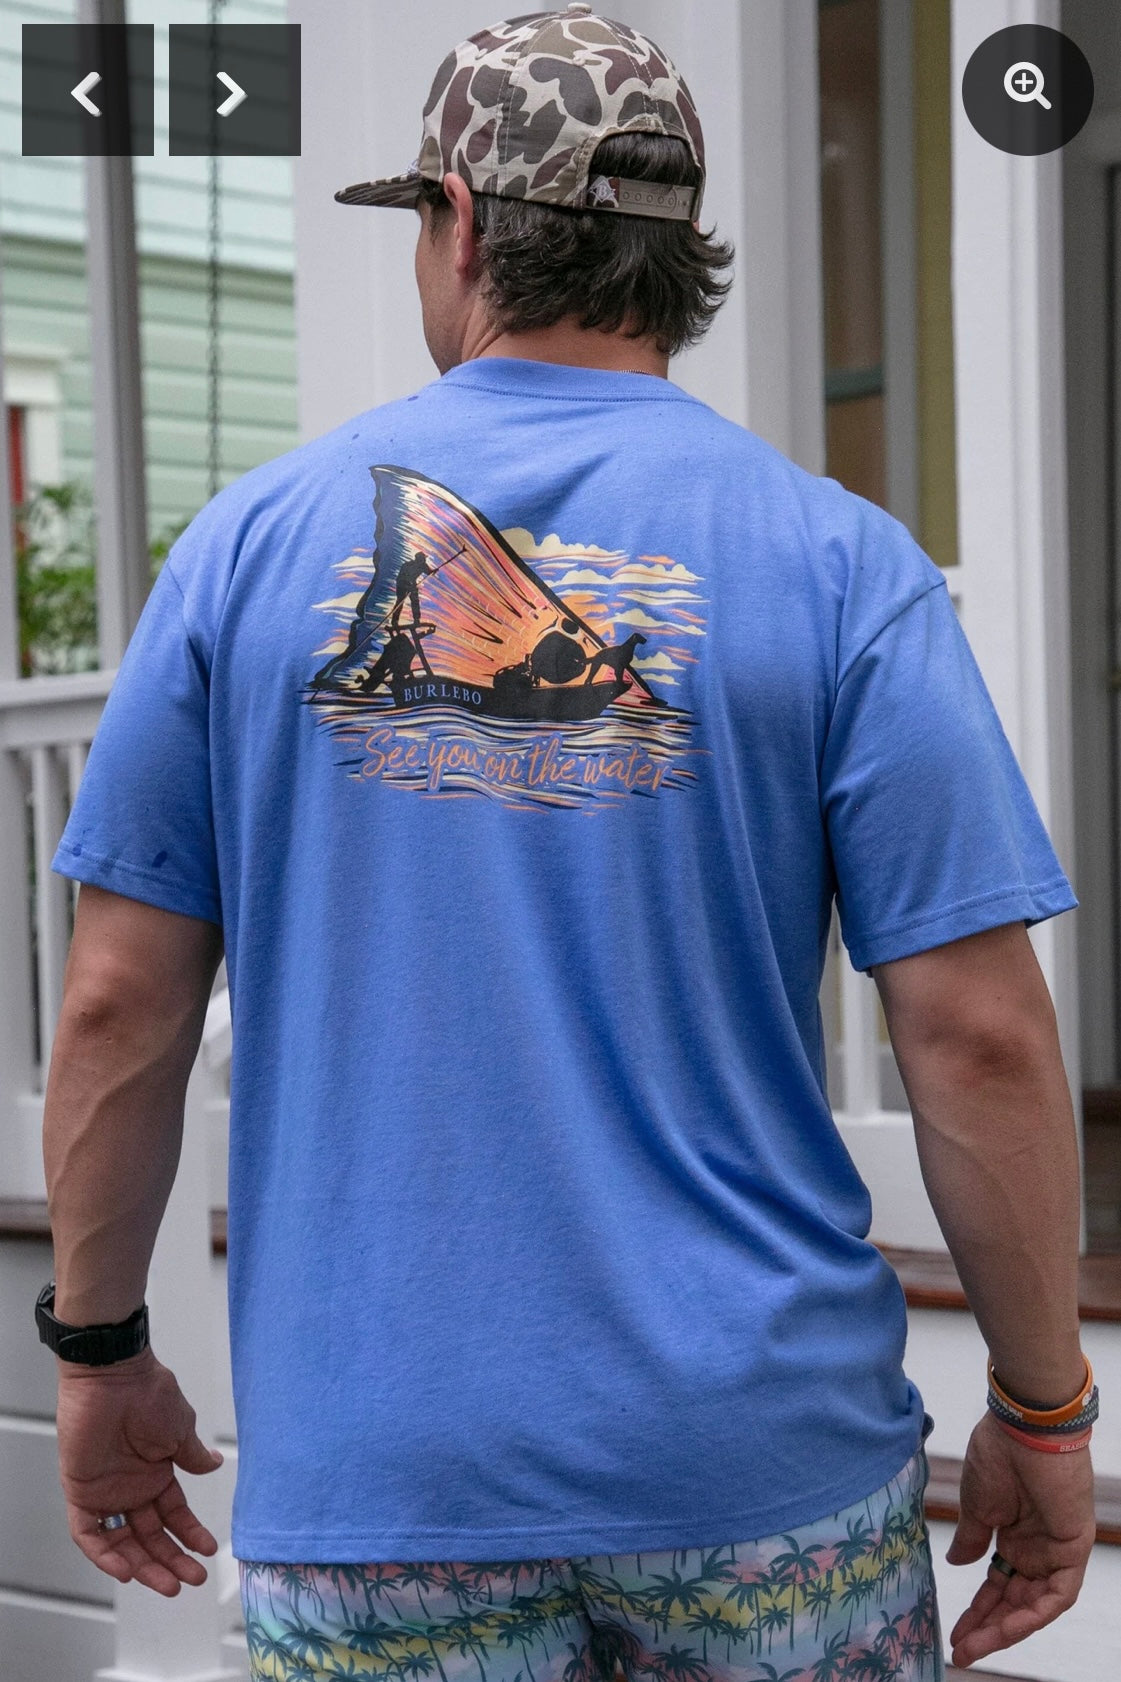 See You on the Water t-shirt